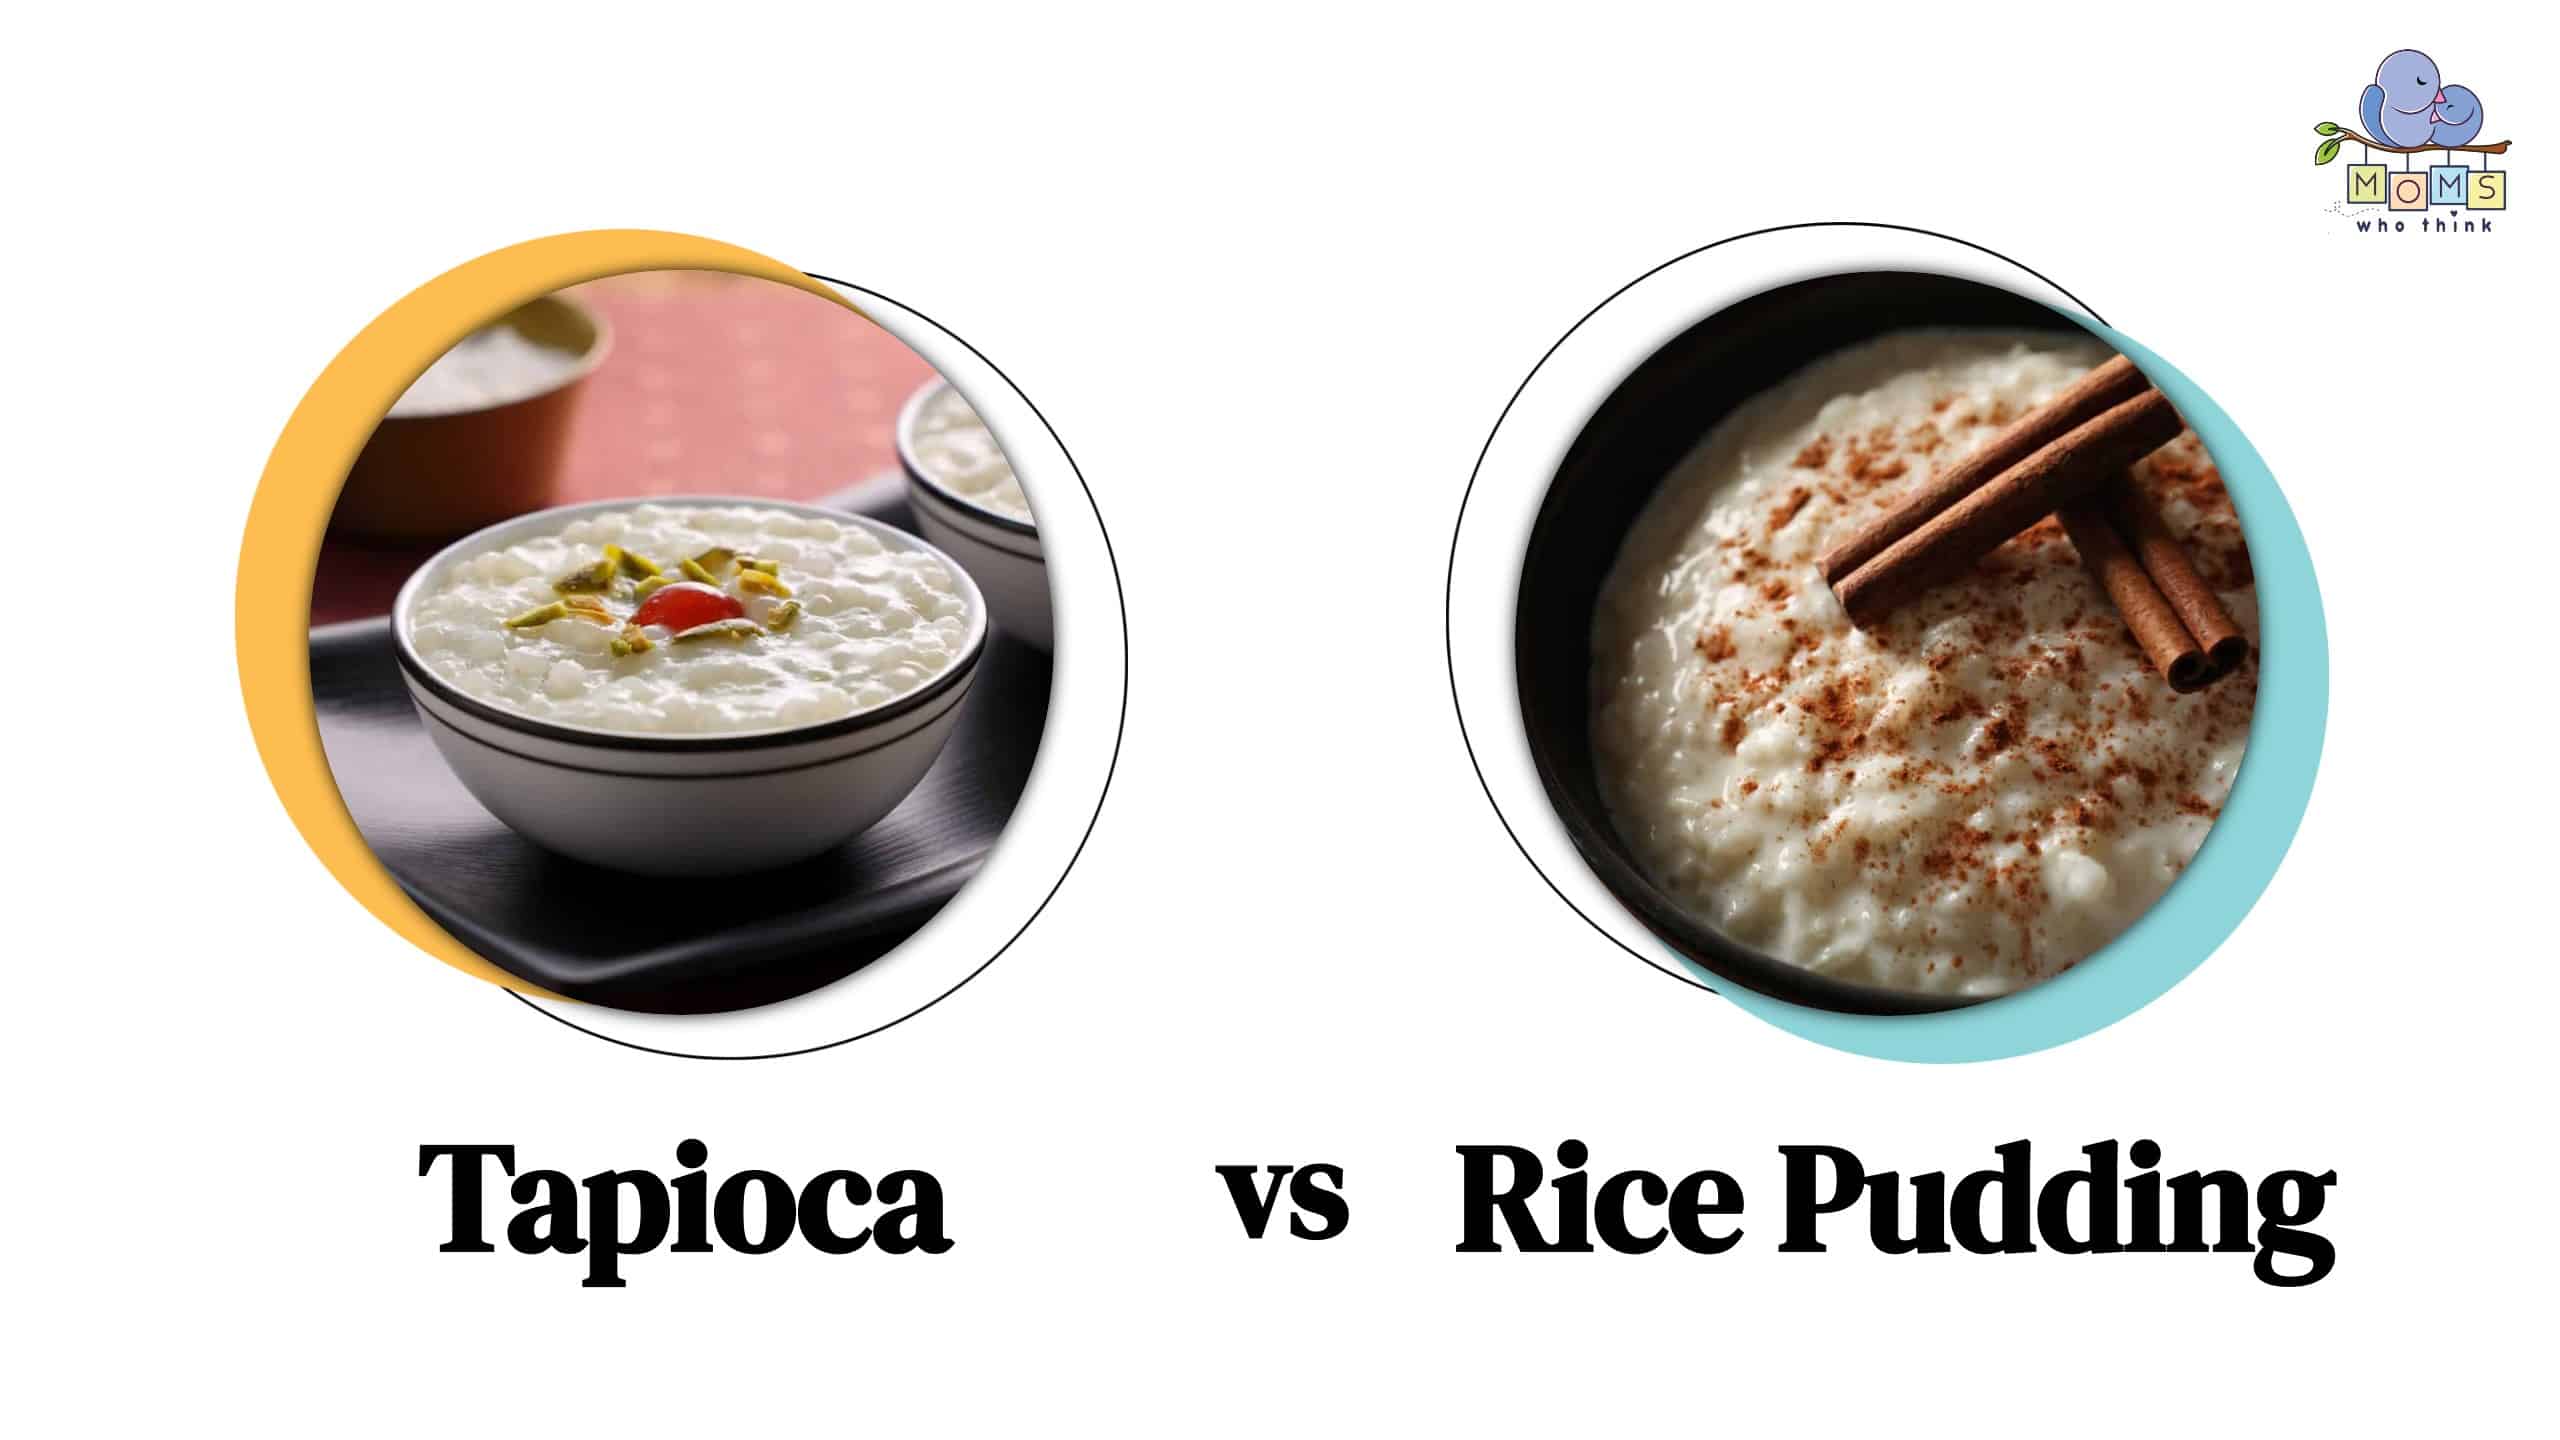 What Is Tapioca And What Does It Taste Like?